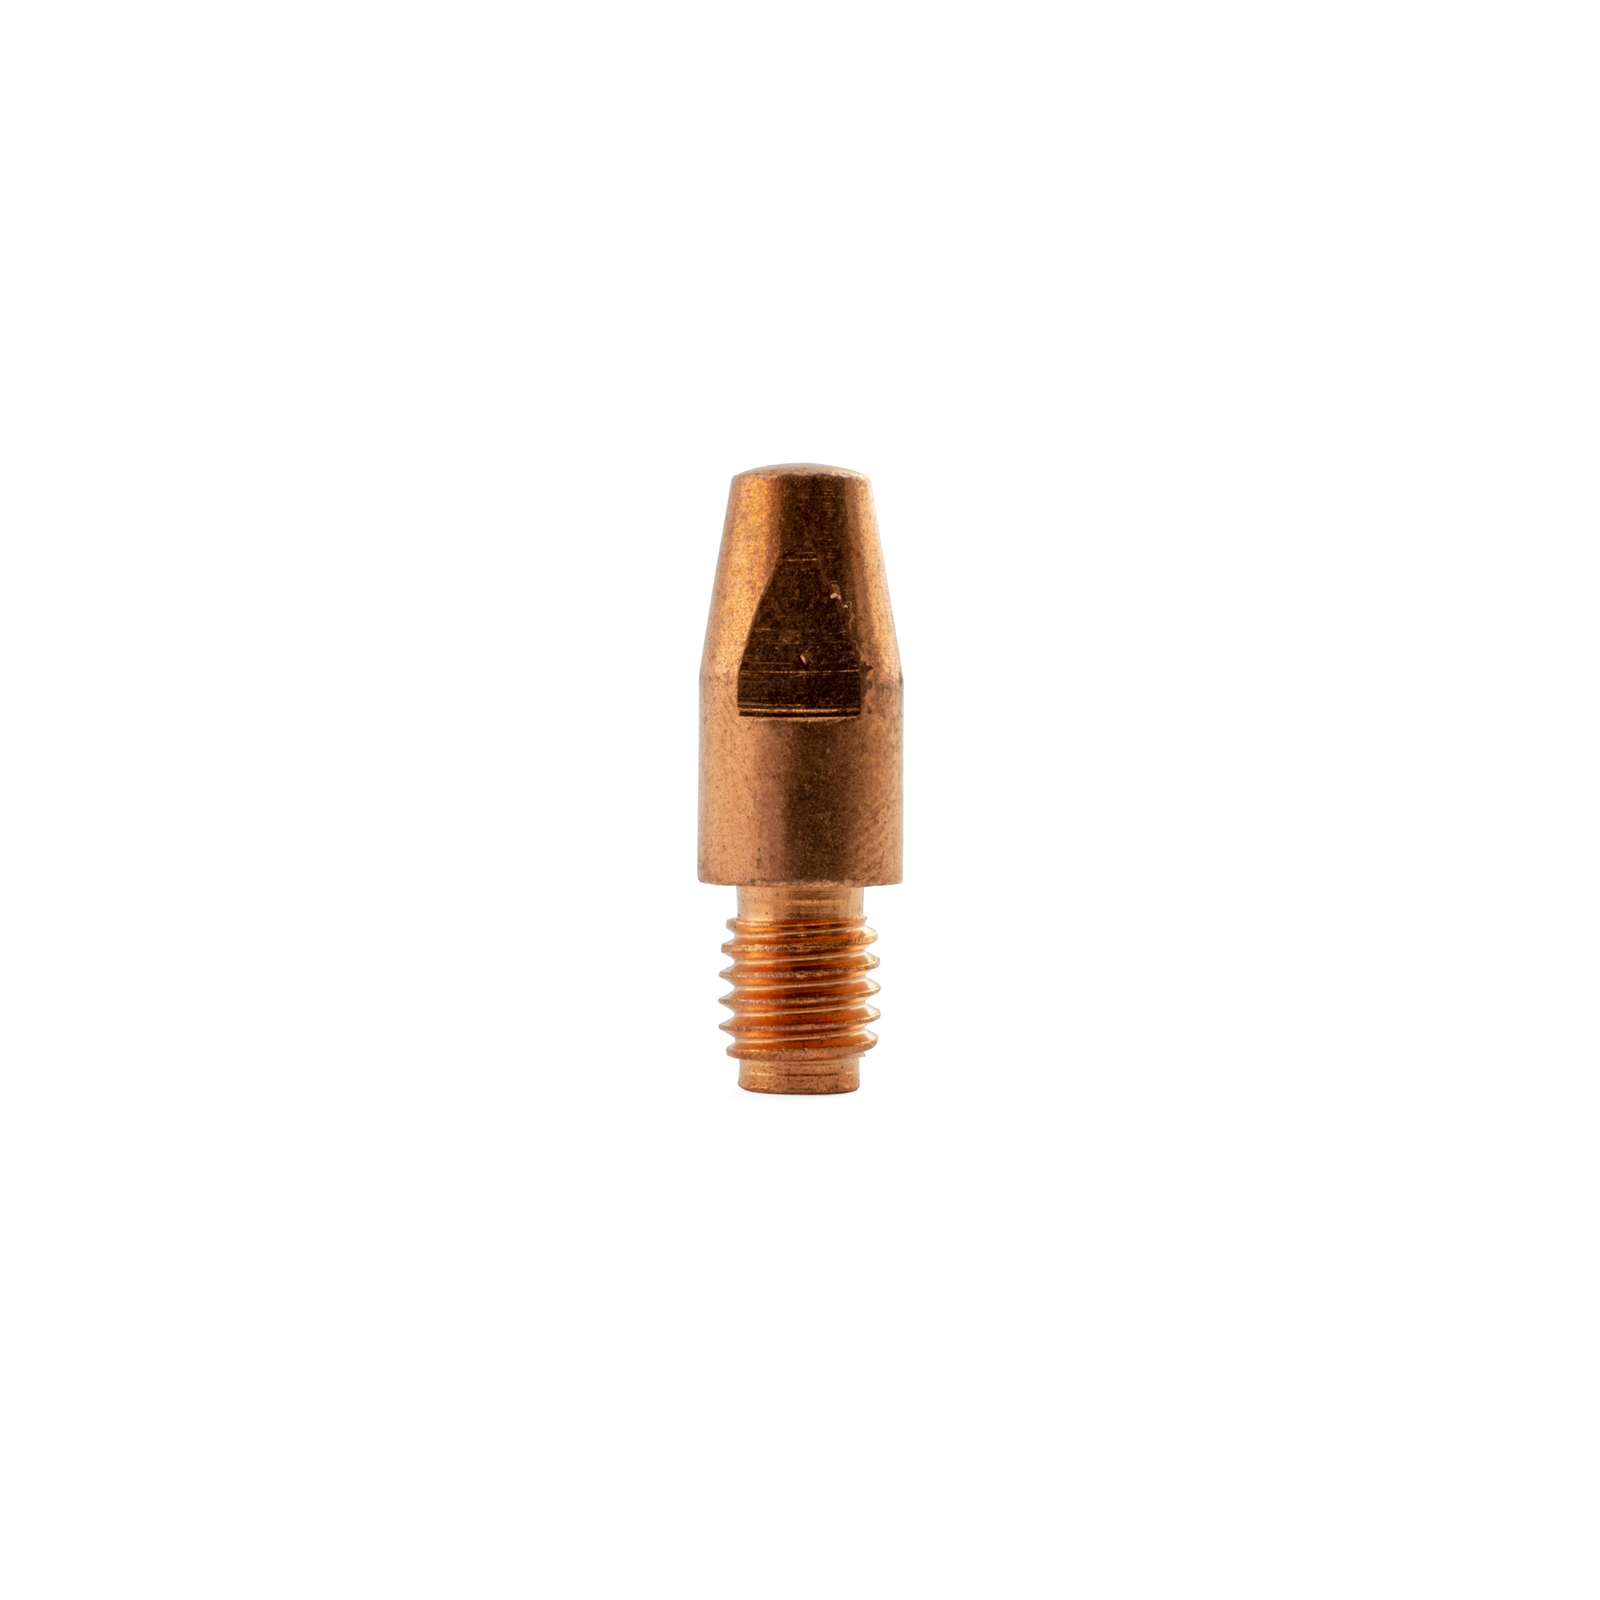 Binzel Style MIG Contact Tips - 2.0mm - 5 pack - M8 x 10mm x 2.0mm